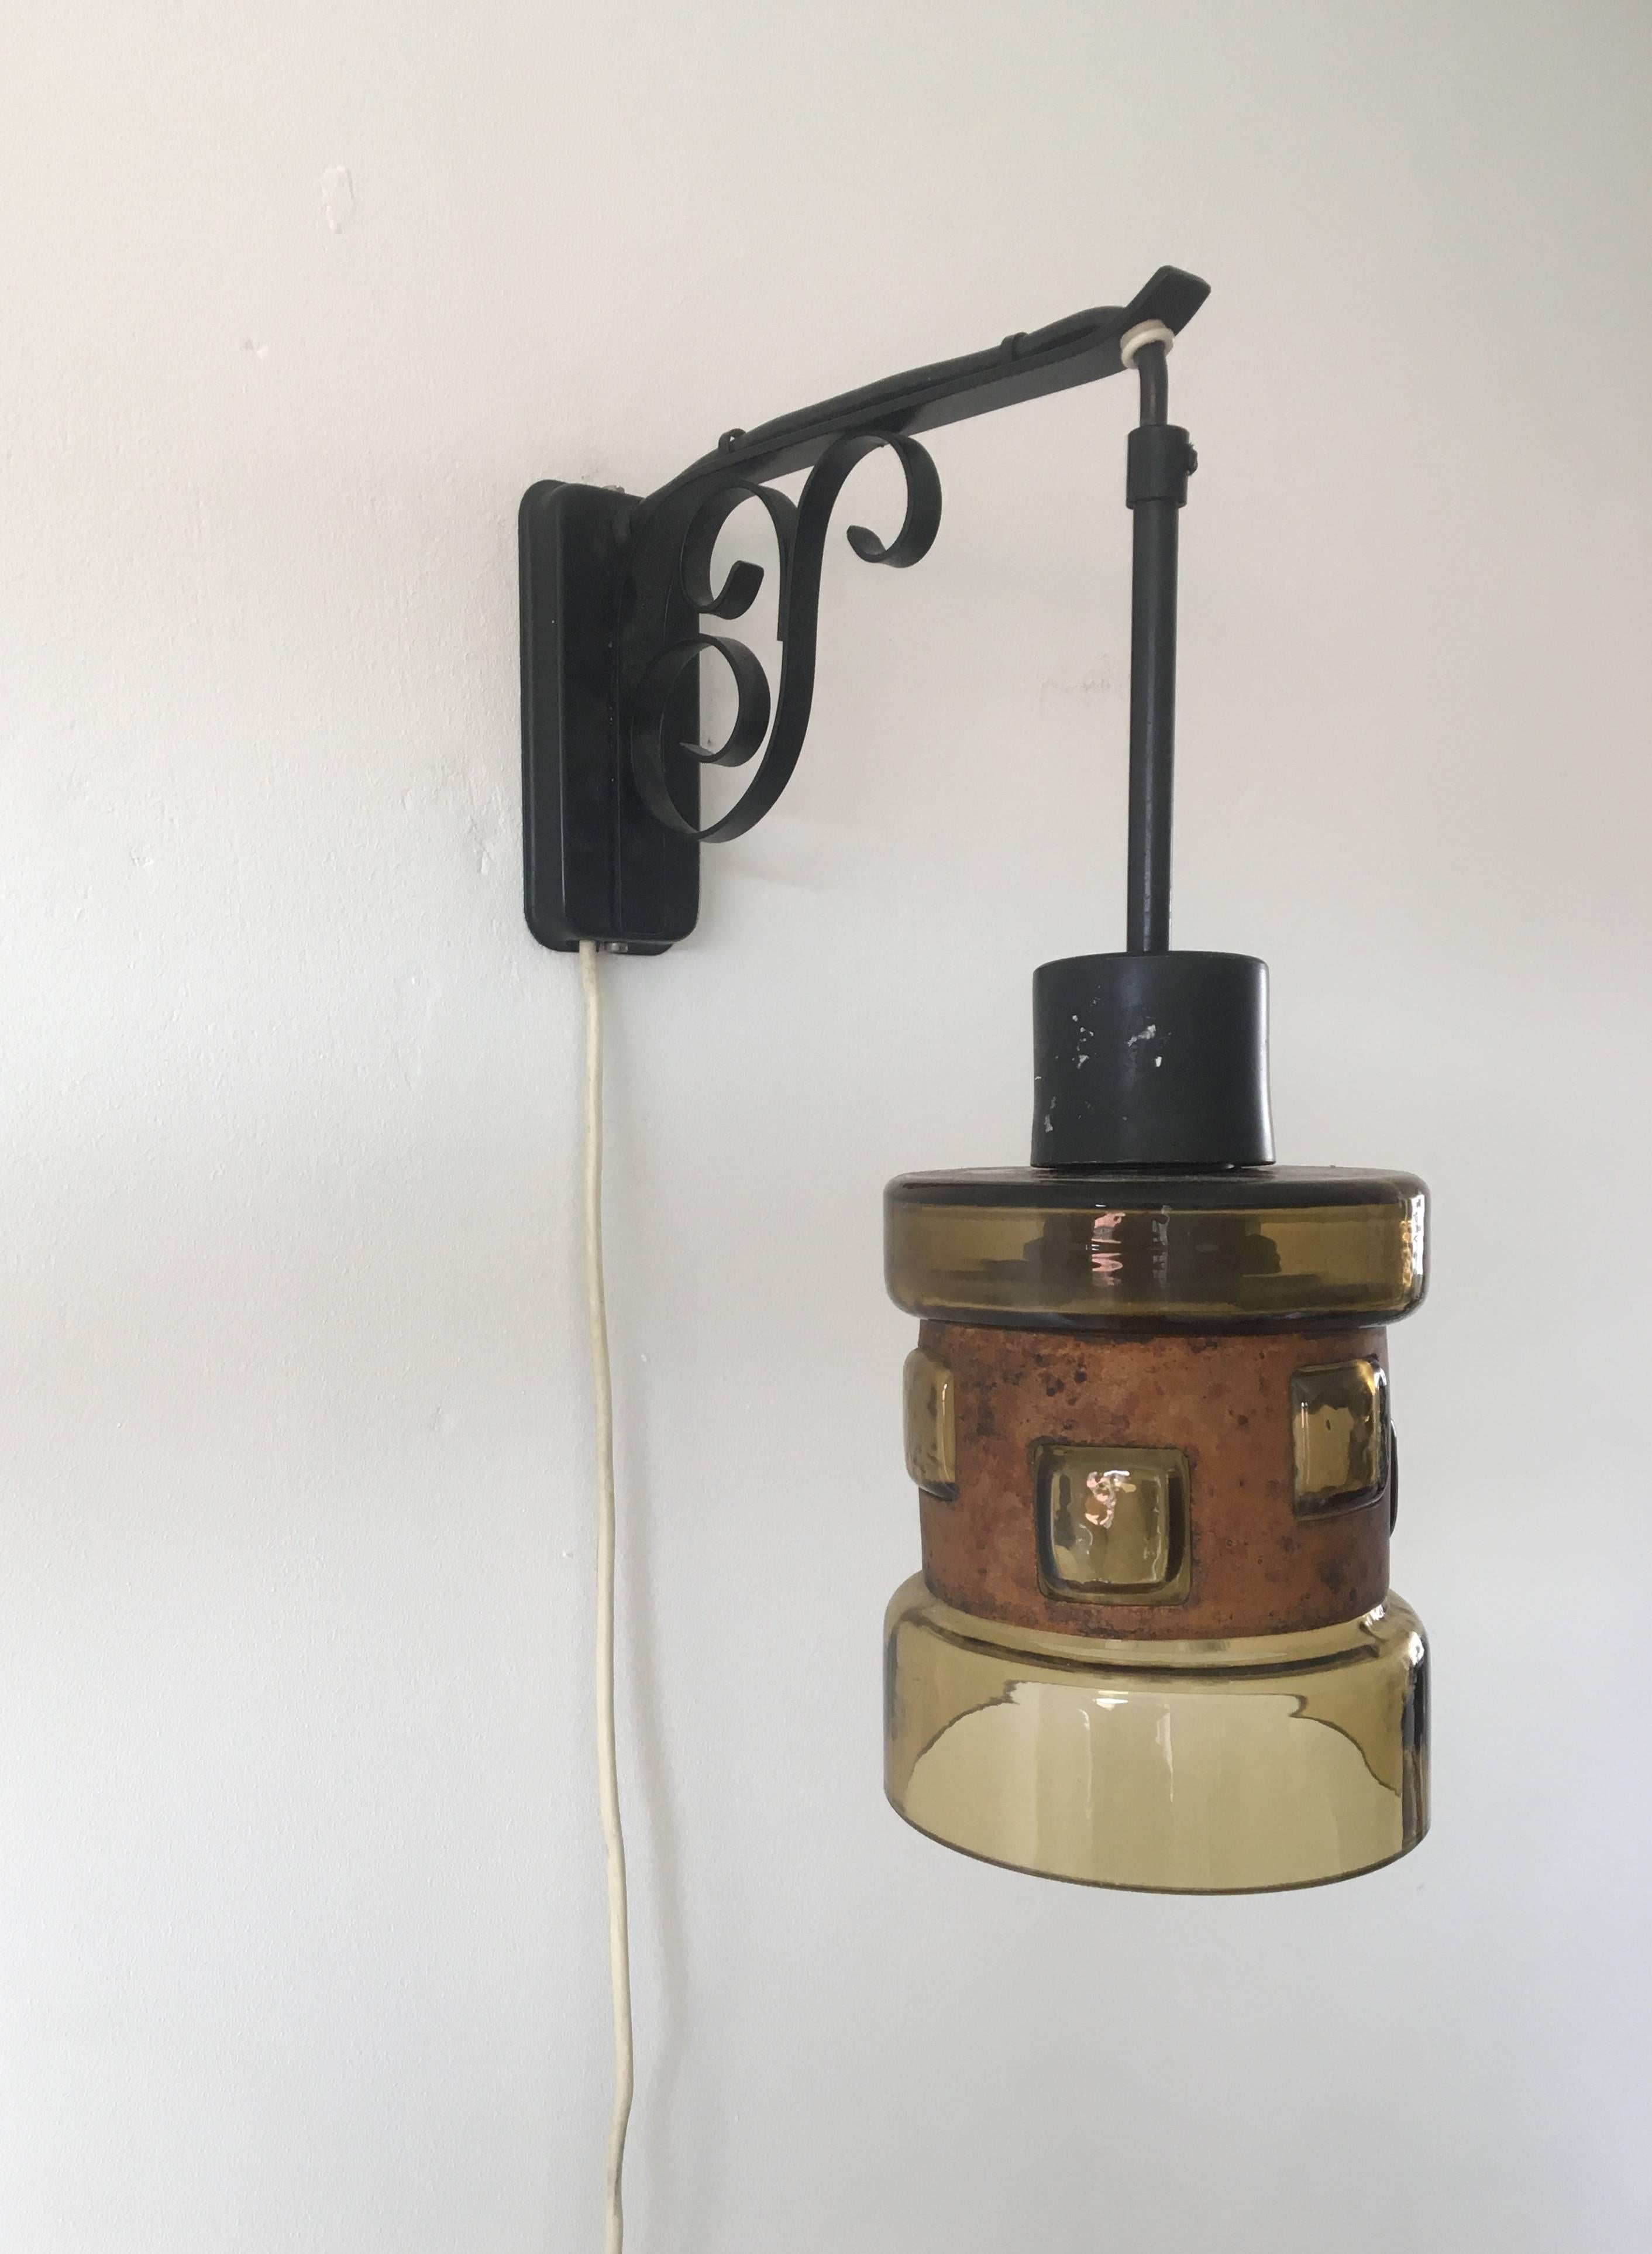 Wonderful lantern hanging on a romantic black lacquered metal base. Typical Nanny still design with copper details. Minor wear and European wiring.